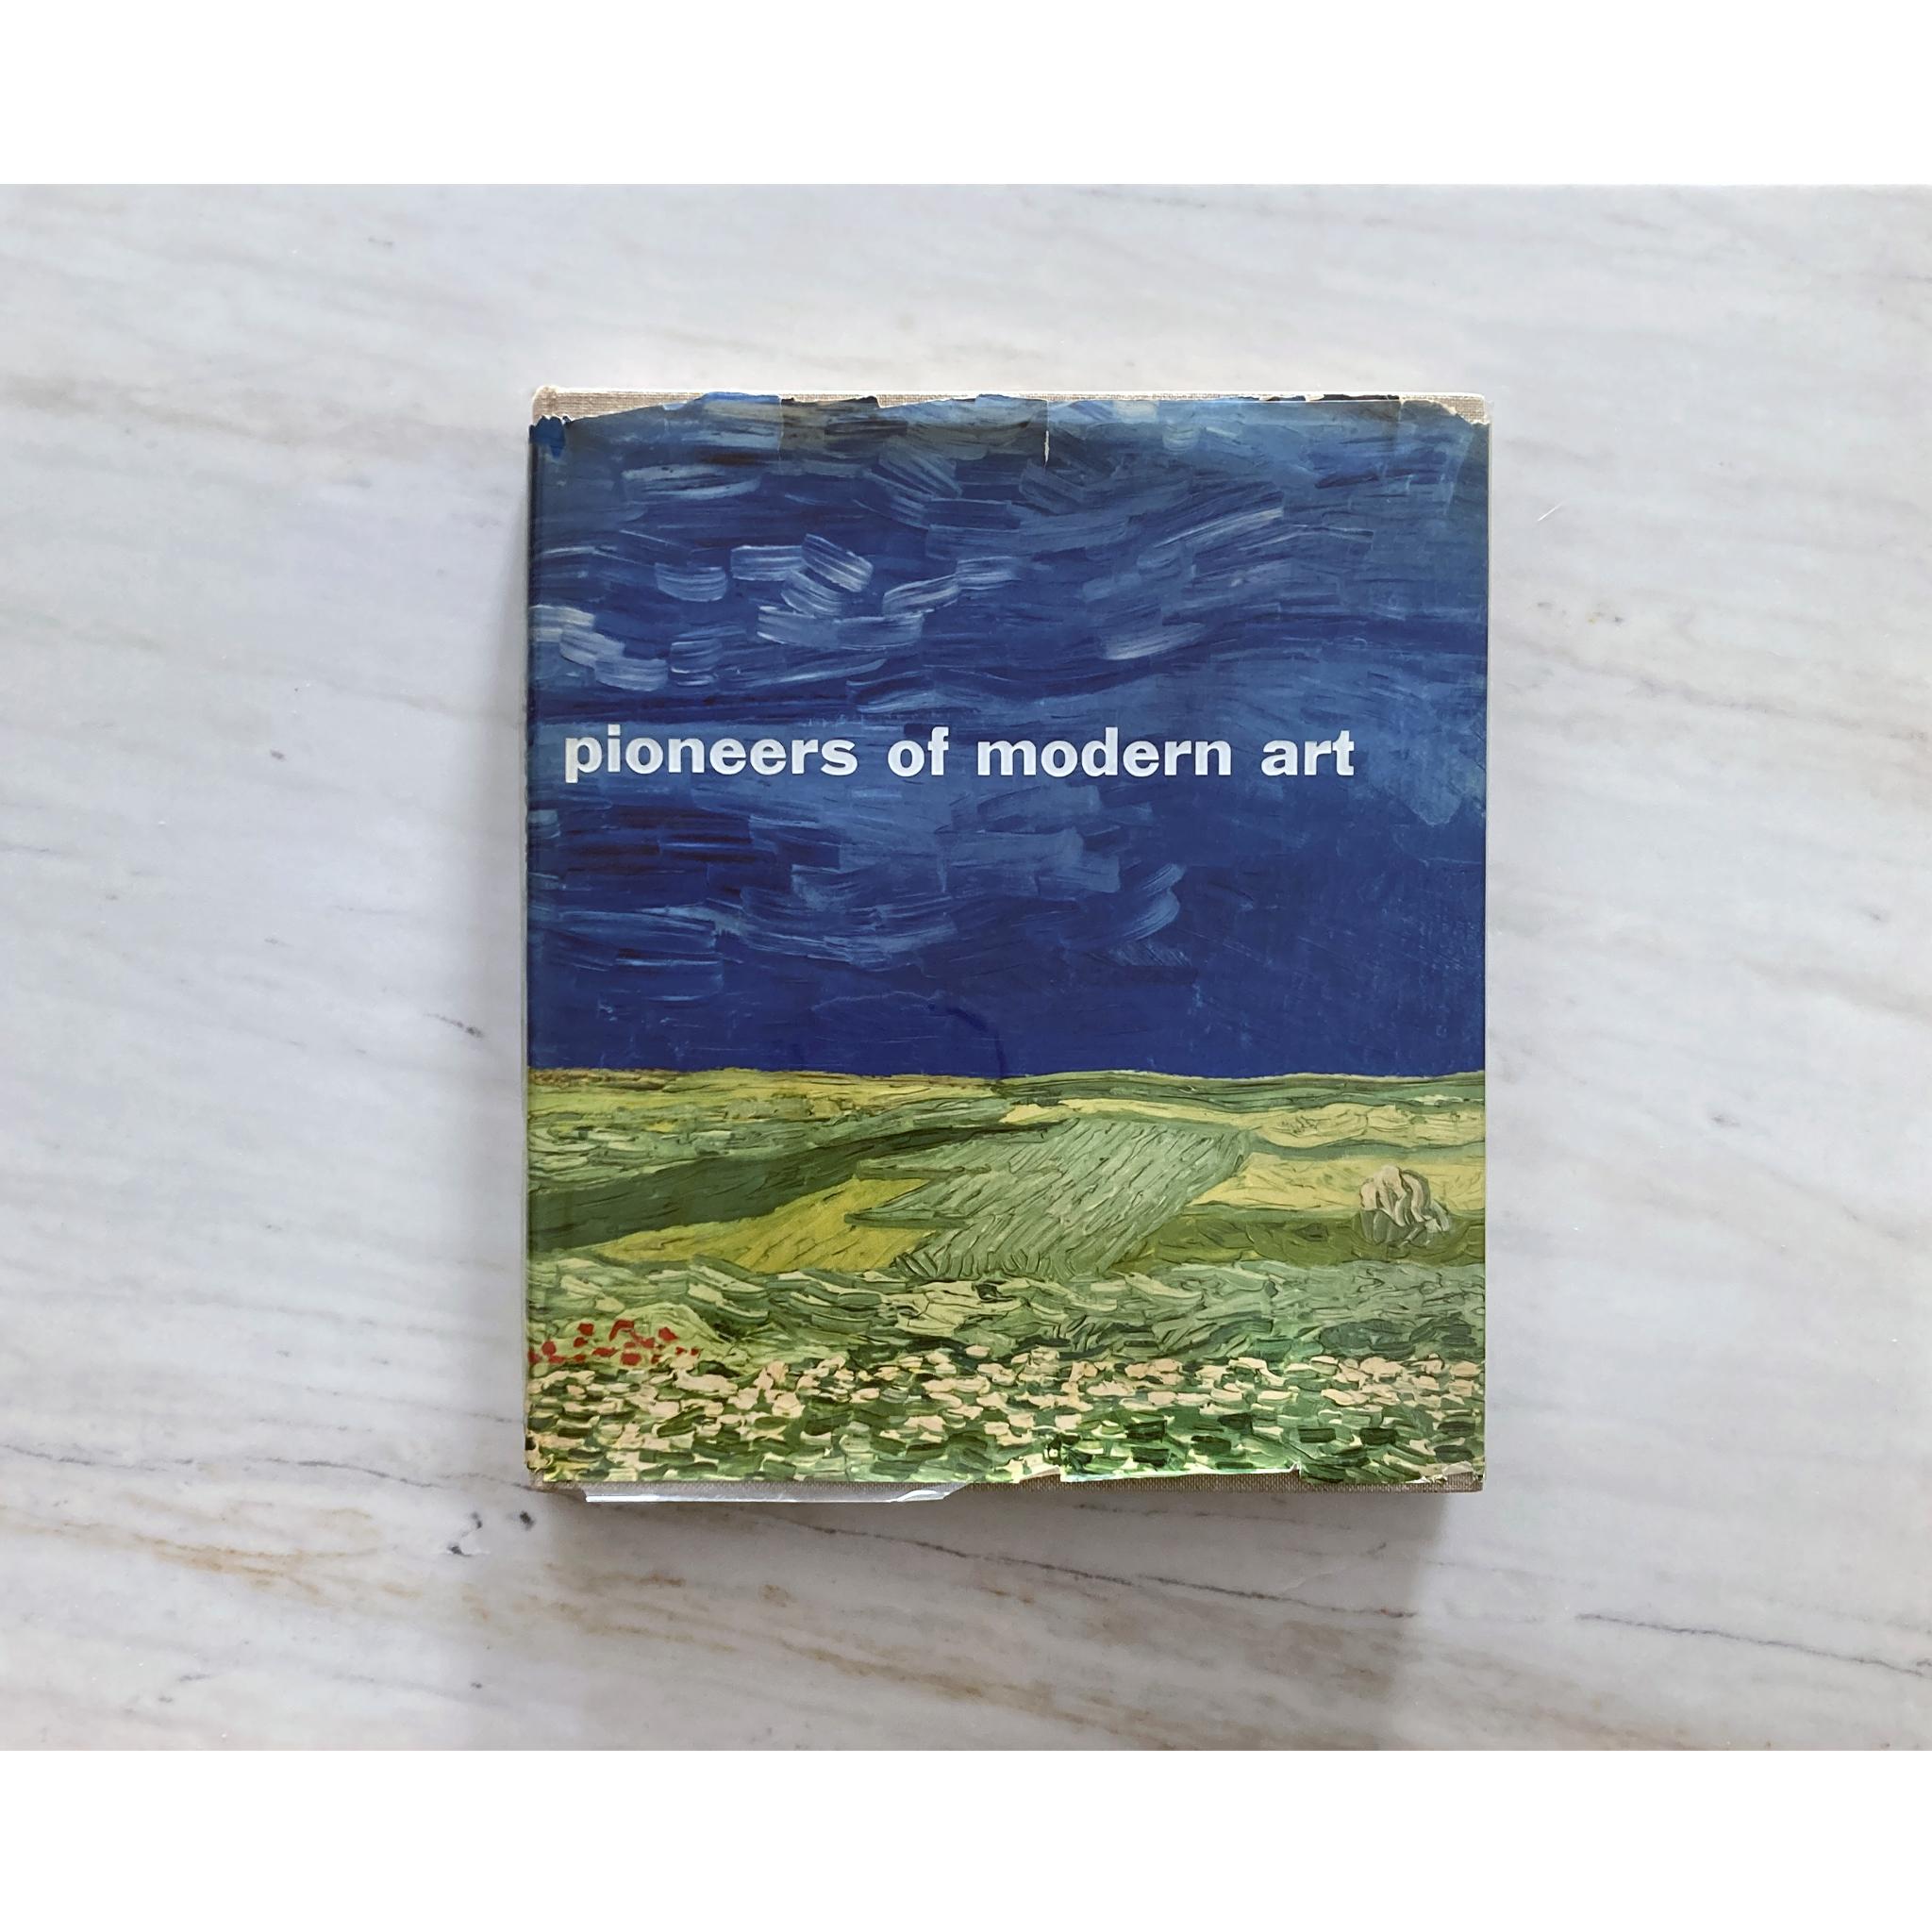 Pioneers of Modern Art features works from 1870 - 1960 by many artists including Van Gogh, Degas, Kirchner, Delauney, Kandinsky, Chagall, Leger, Picasso, Moholy Nagy, Le Corbusier. Stunning illustrations in both color and black and white with great